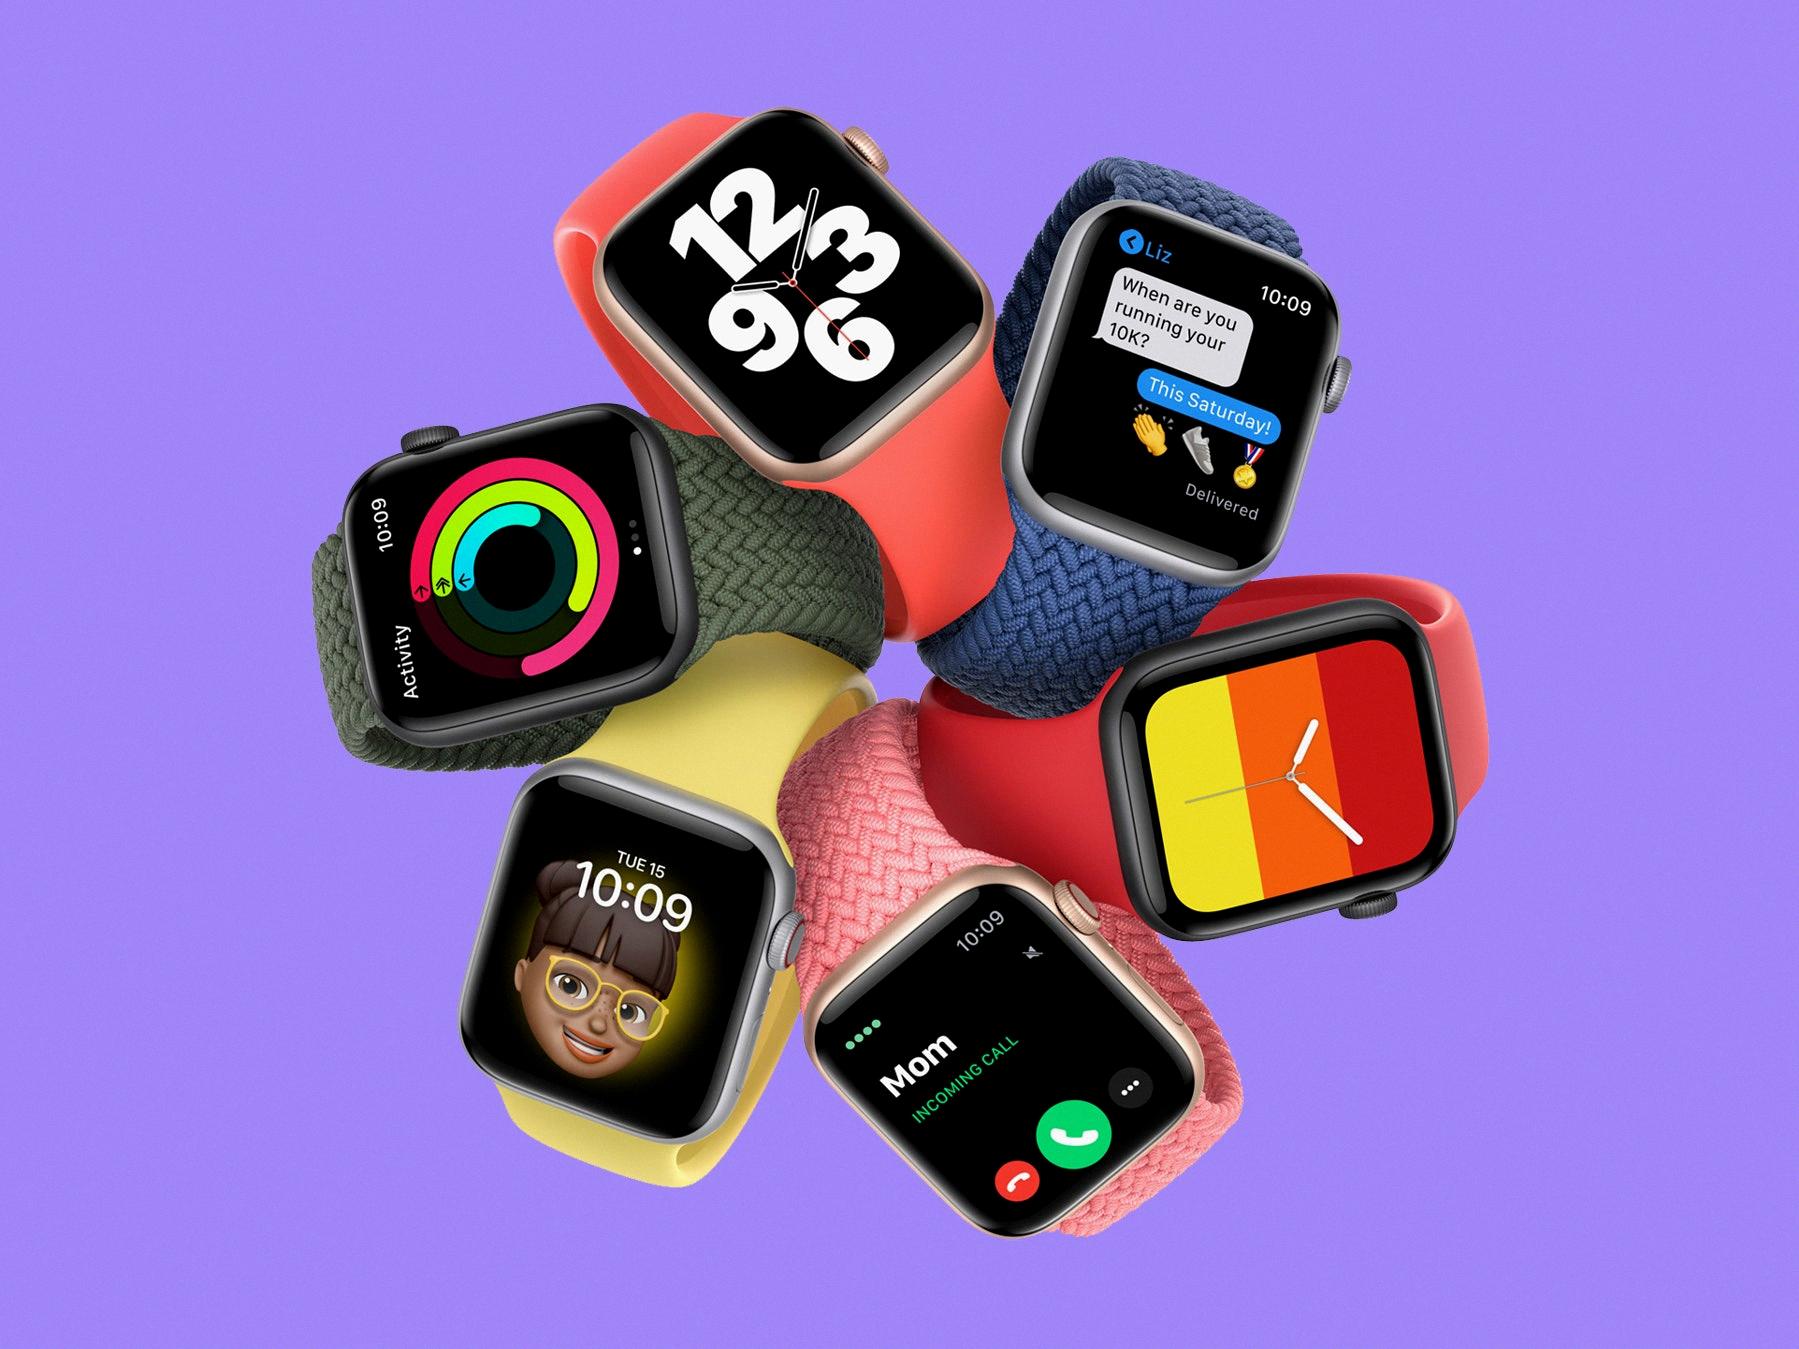 apple watch turned off during update